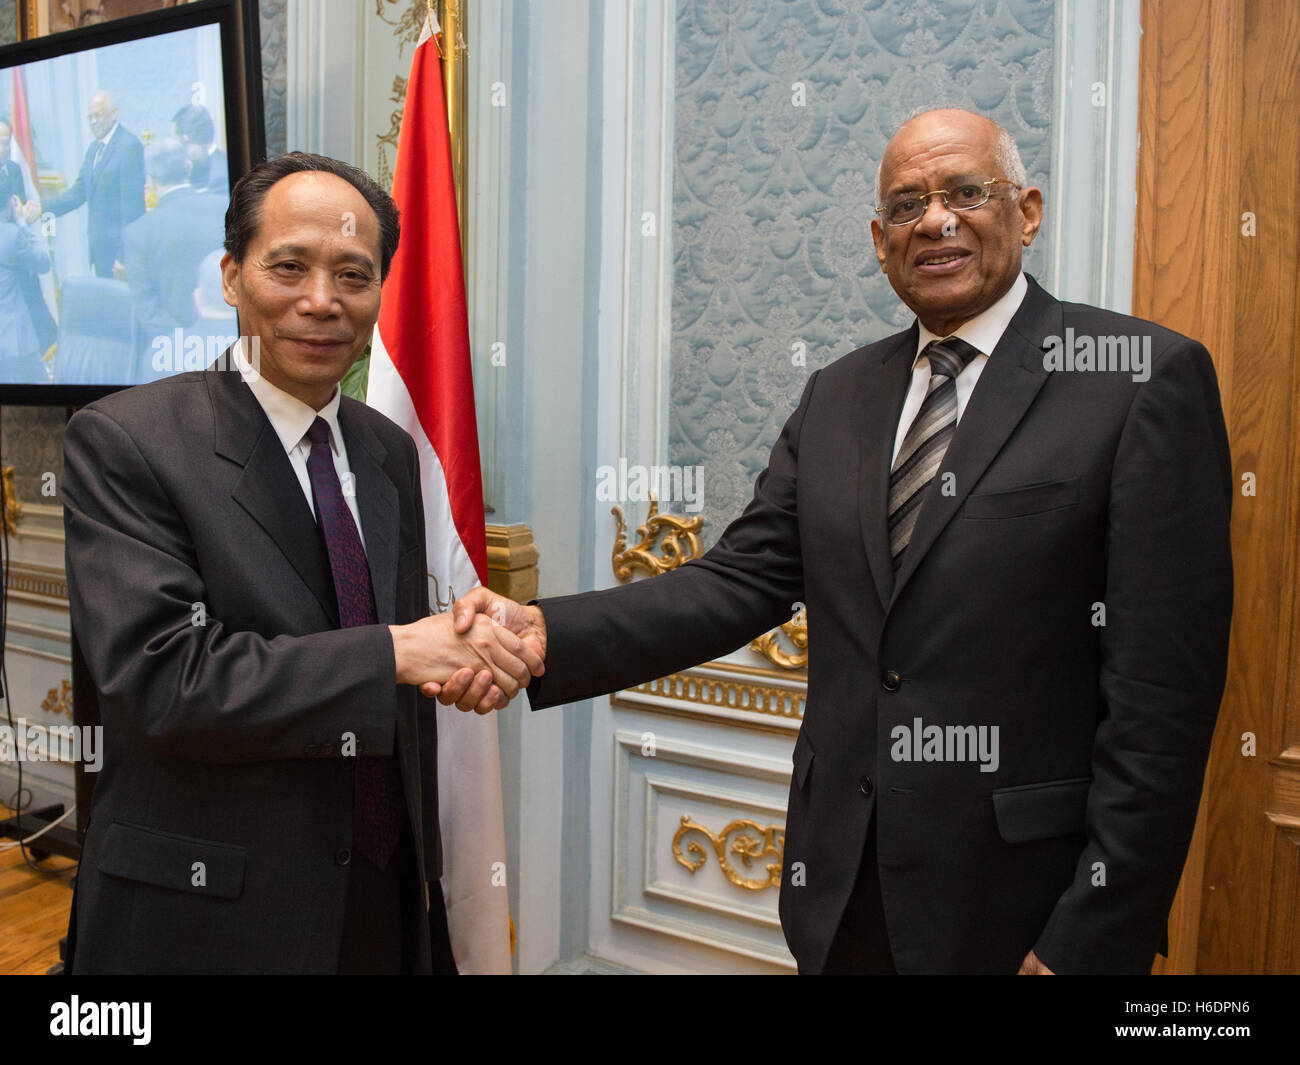 Cairo, Egypt. 17th Nov, 2016. Ji Bingxuan (L), vice chairman of the Standing Committee of the National People's Congress of China, meets with Ali Abdelaal, speaker of the Egyptian parliament, in Cairo, Egypt, on Nov. 17, 2016. © Meng Tao/Xinhua/Alamy Live News Stock Photo